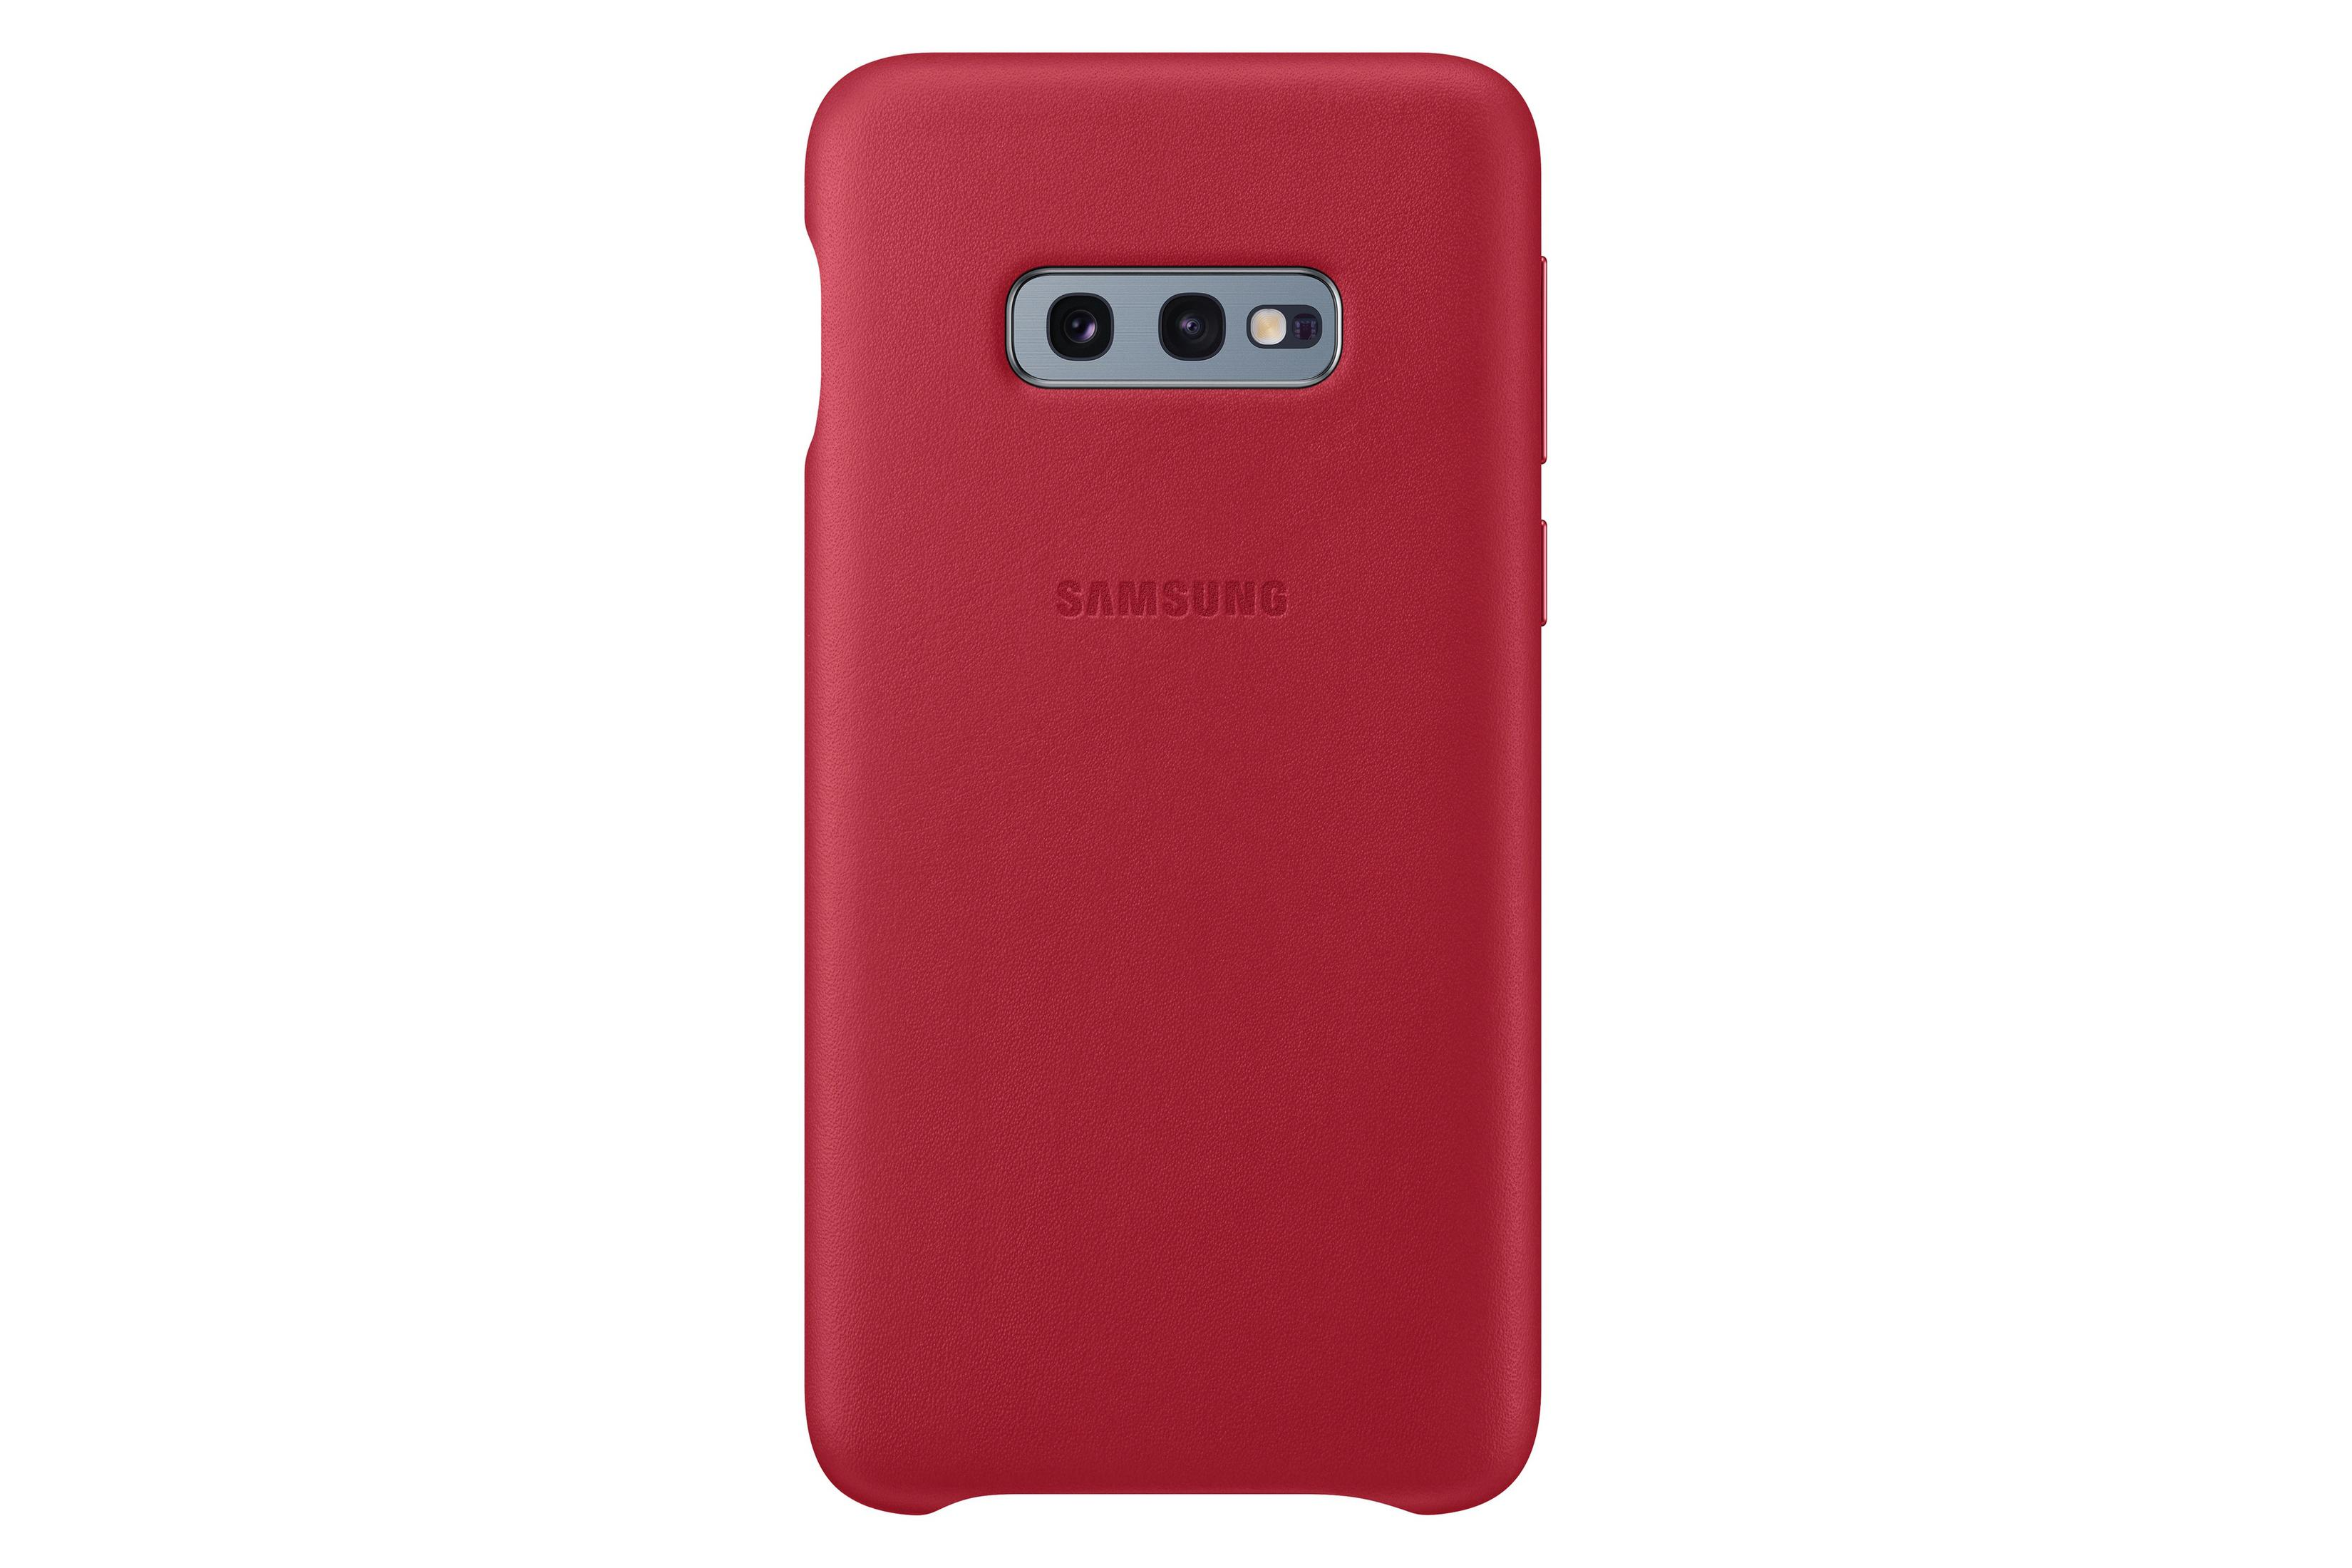 SAMSUNG EF-VG970LREGWW S10E COVER LEATHER Samsung, Backcover, Rot RED, S10e, Galaxy